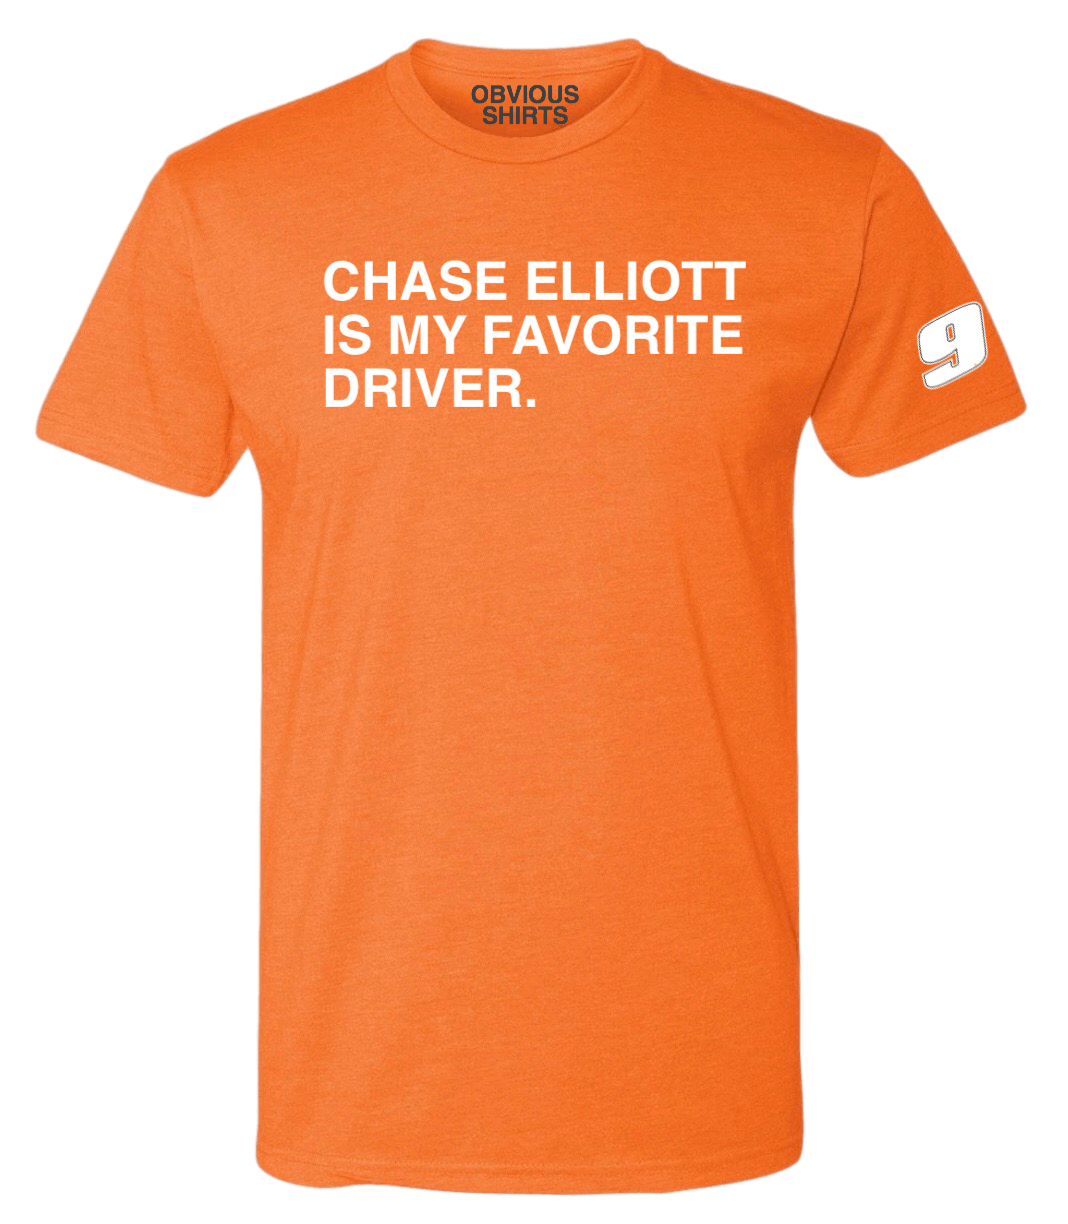 CHASE ELLIOTT IS MY FAVORITE DRIVER. - OBVIOUS SHIRTS